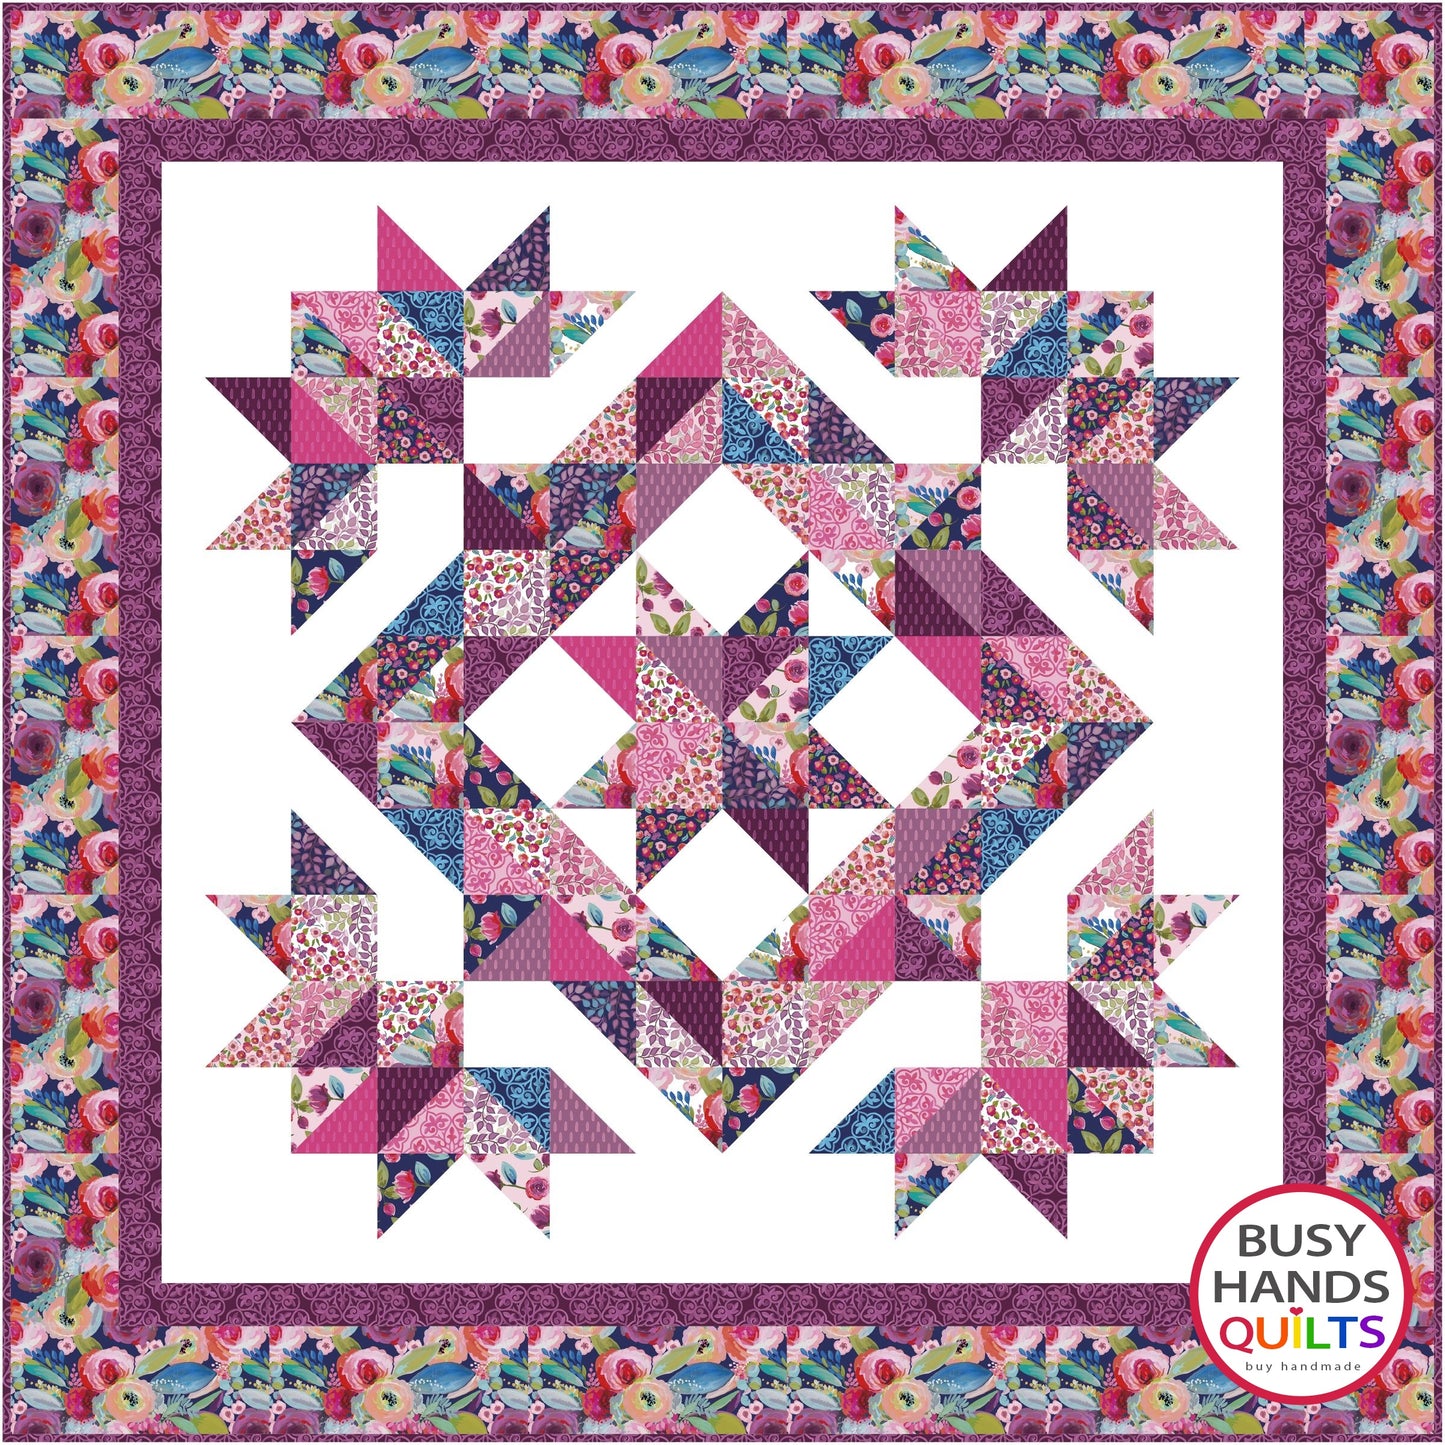 Whimsical Quilt Pattern PRINTED Busy Hands Quilts {$price}